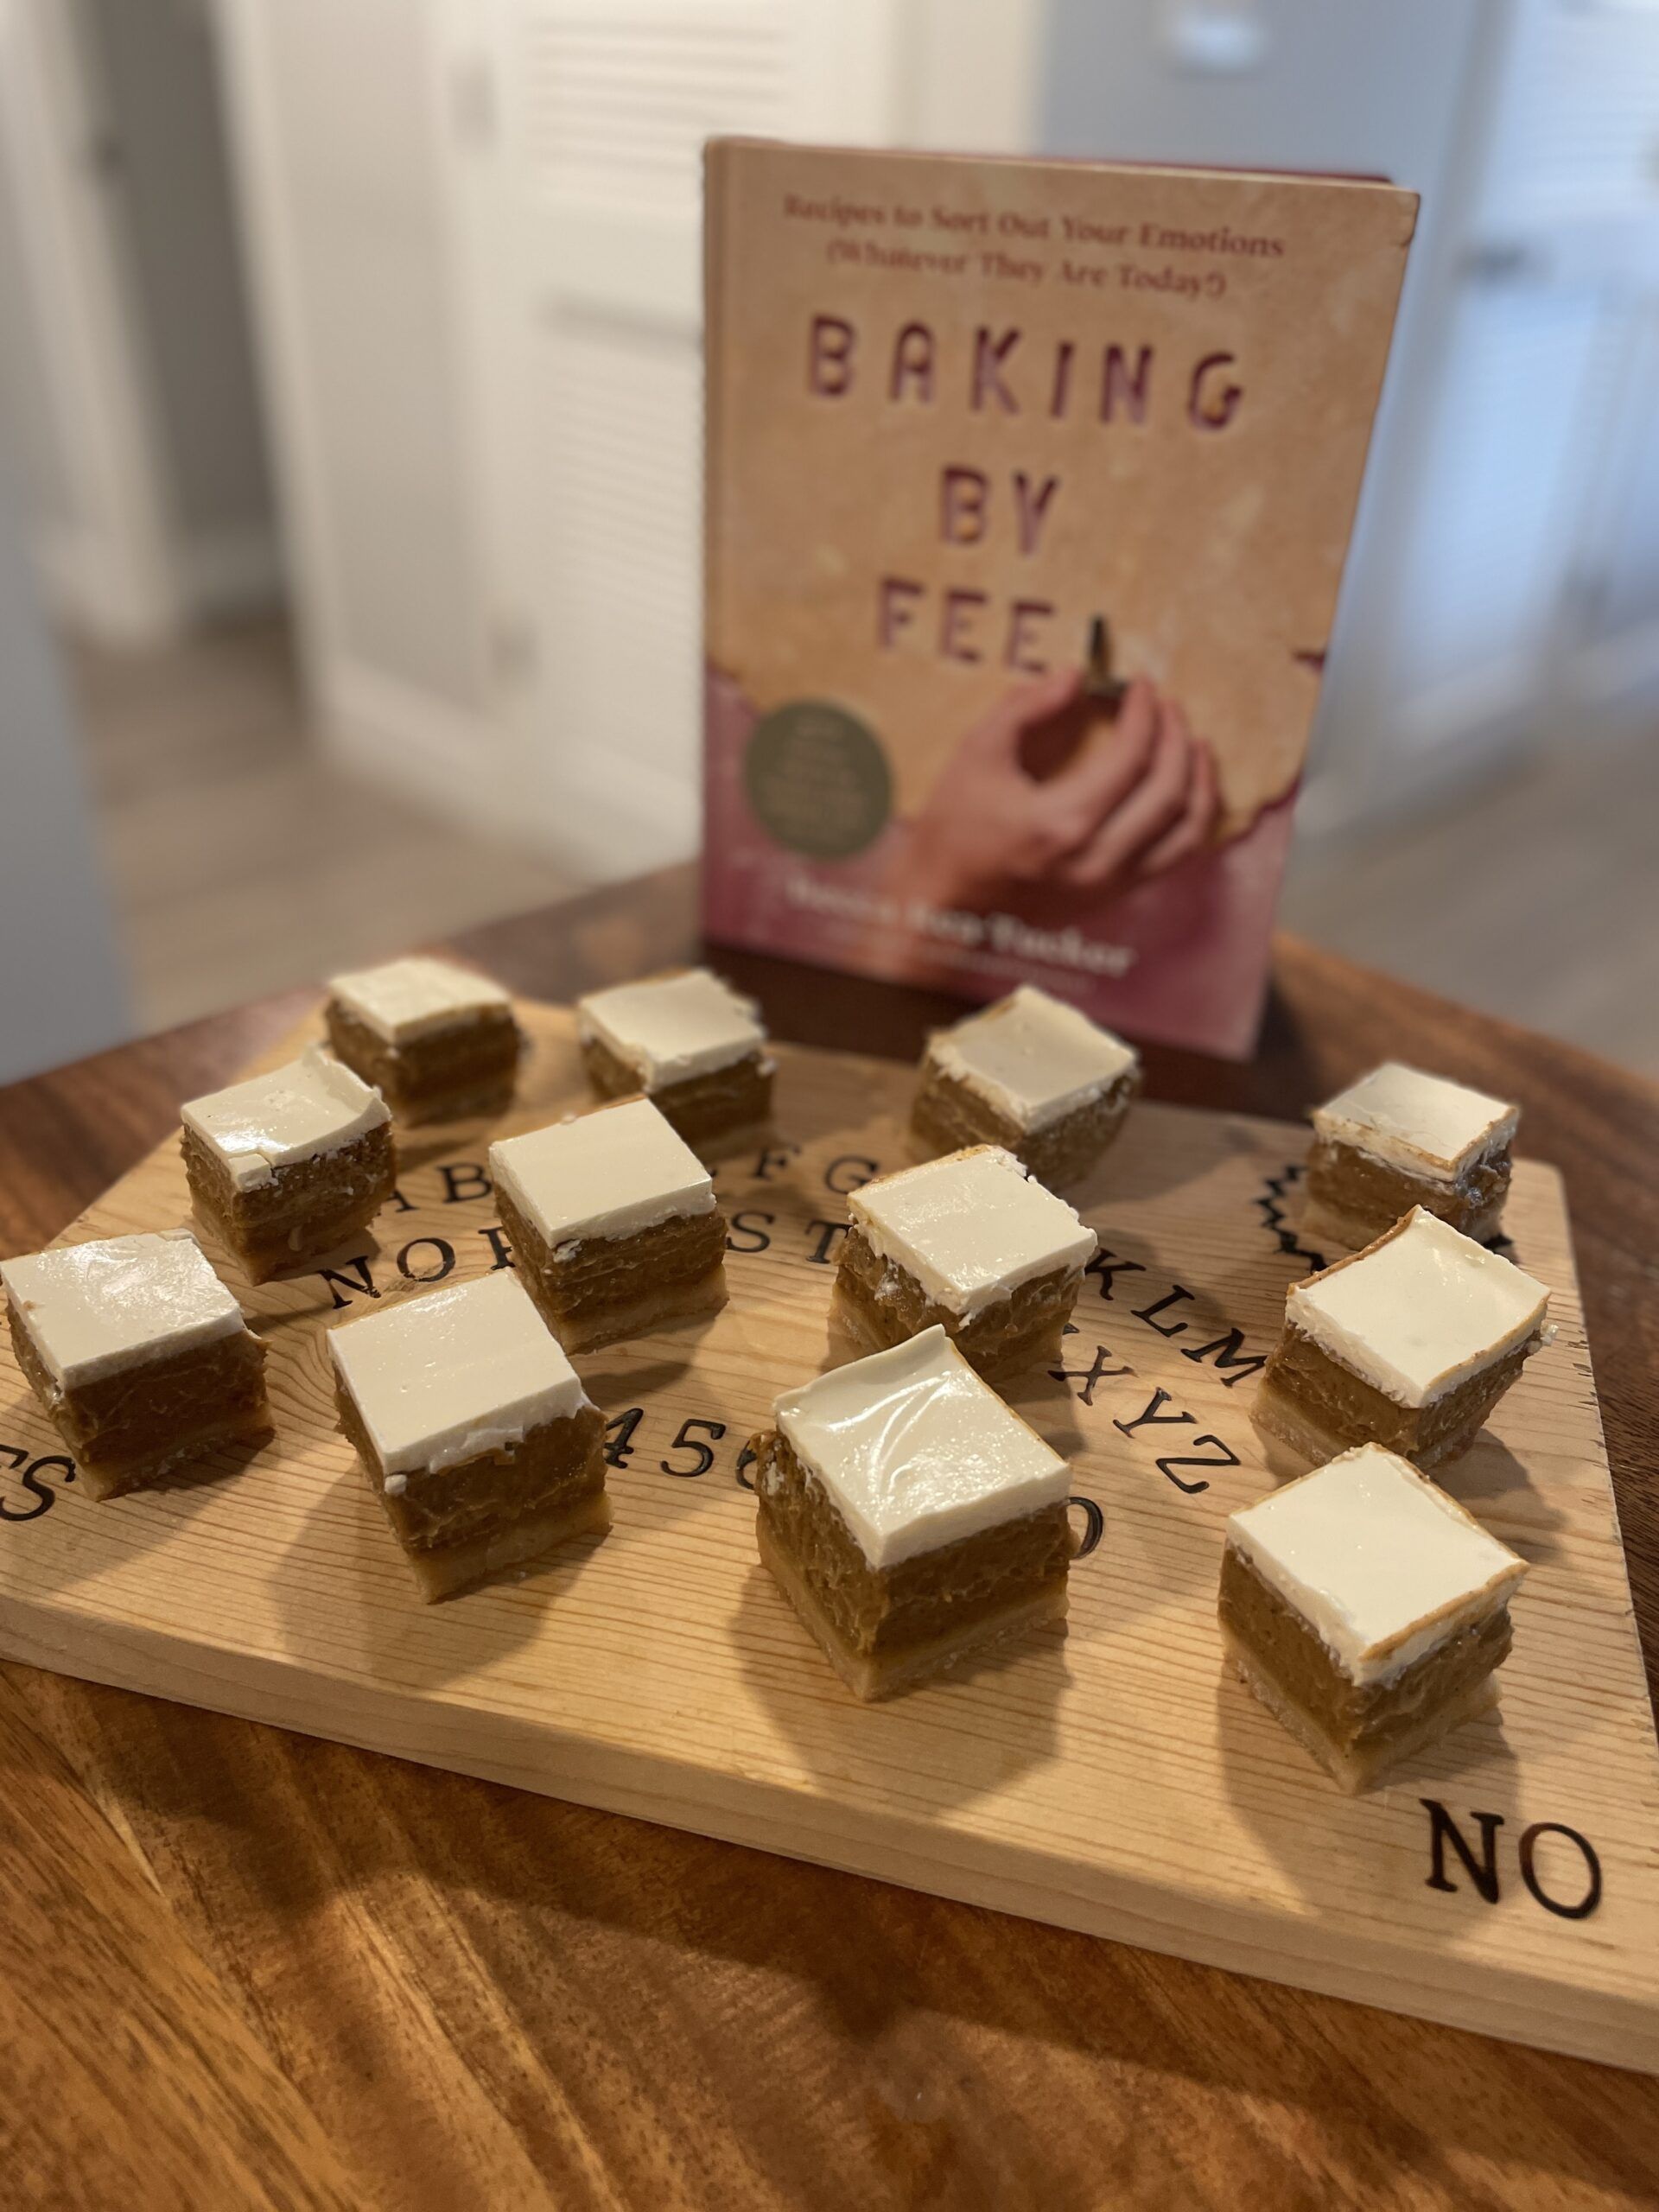 Twelve layered pumpkin pie bars with sour cream topping on a wooden cutting board designed to look like a ouija board, sitting on a wooden table next to the cookbook Baking By Feel